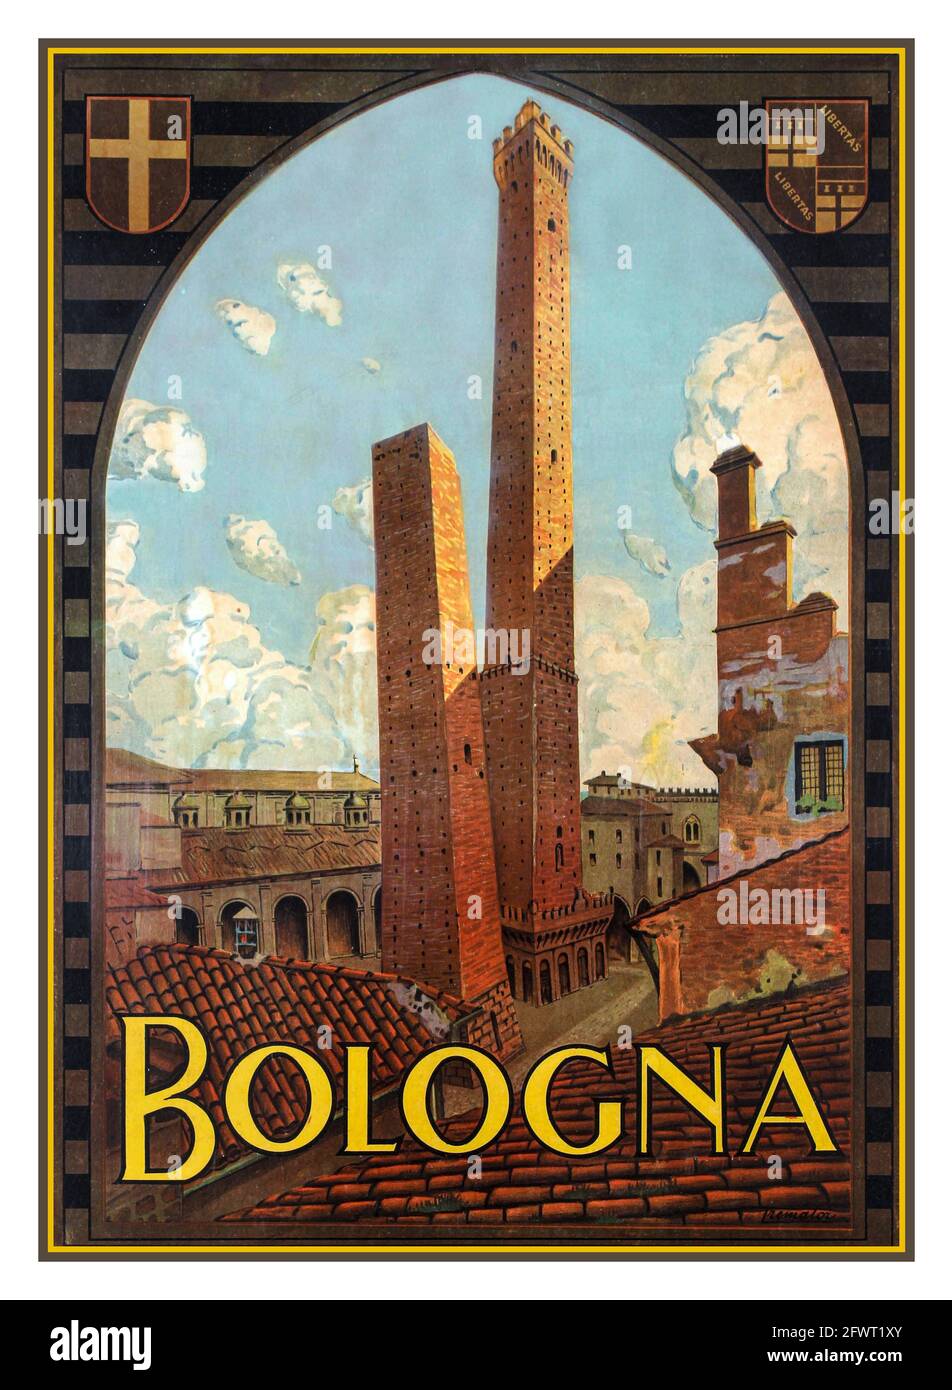 Vintage Bologna by Trematore 1930 VINTAGE ORIGINAL Italian POSTER LITHOGRAPH Bologna Italy Retro advertising poster of the city of Bologna with the two historic landmark towers of Garisenda and Asinelli. Stock Photo